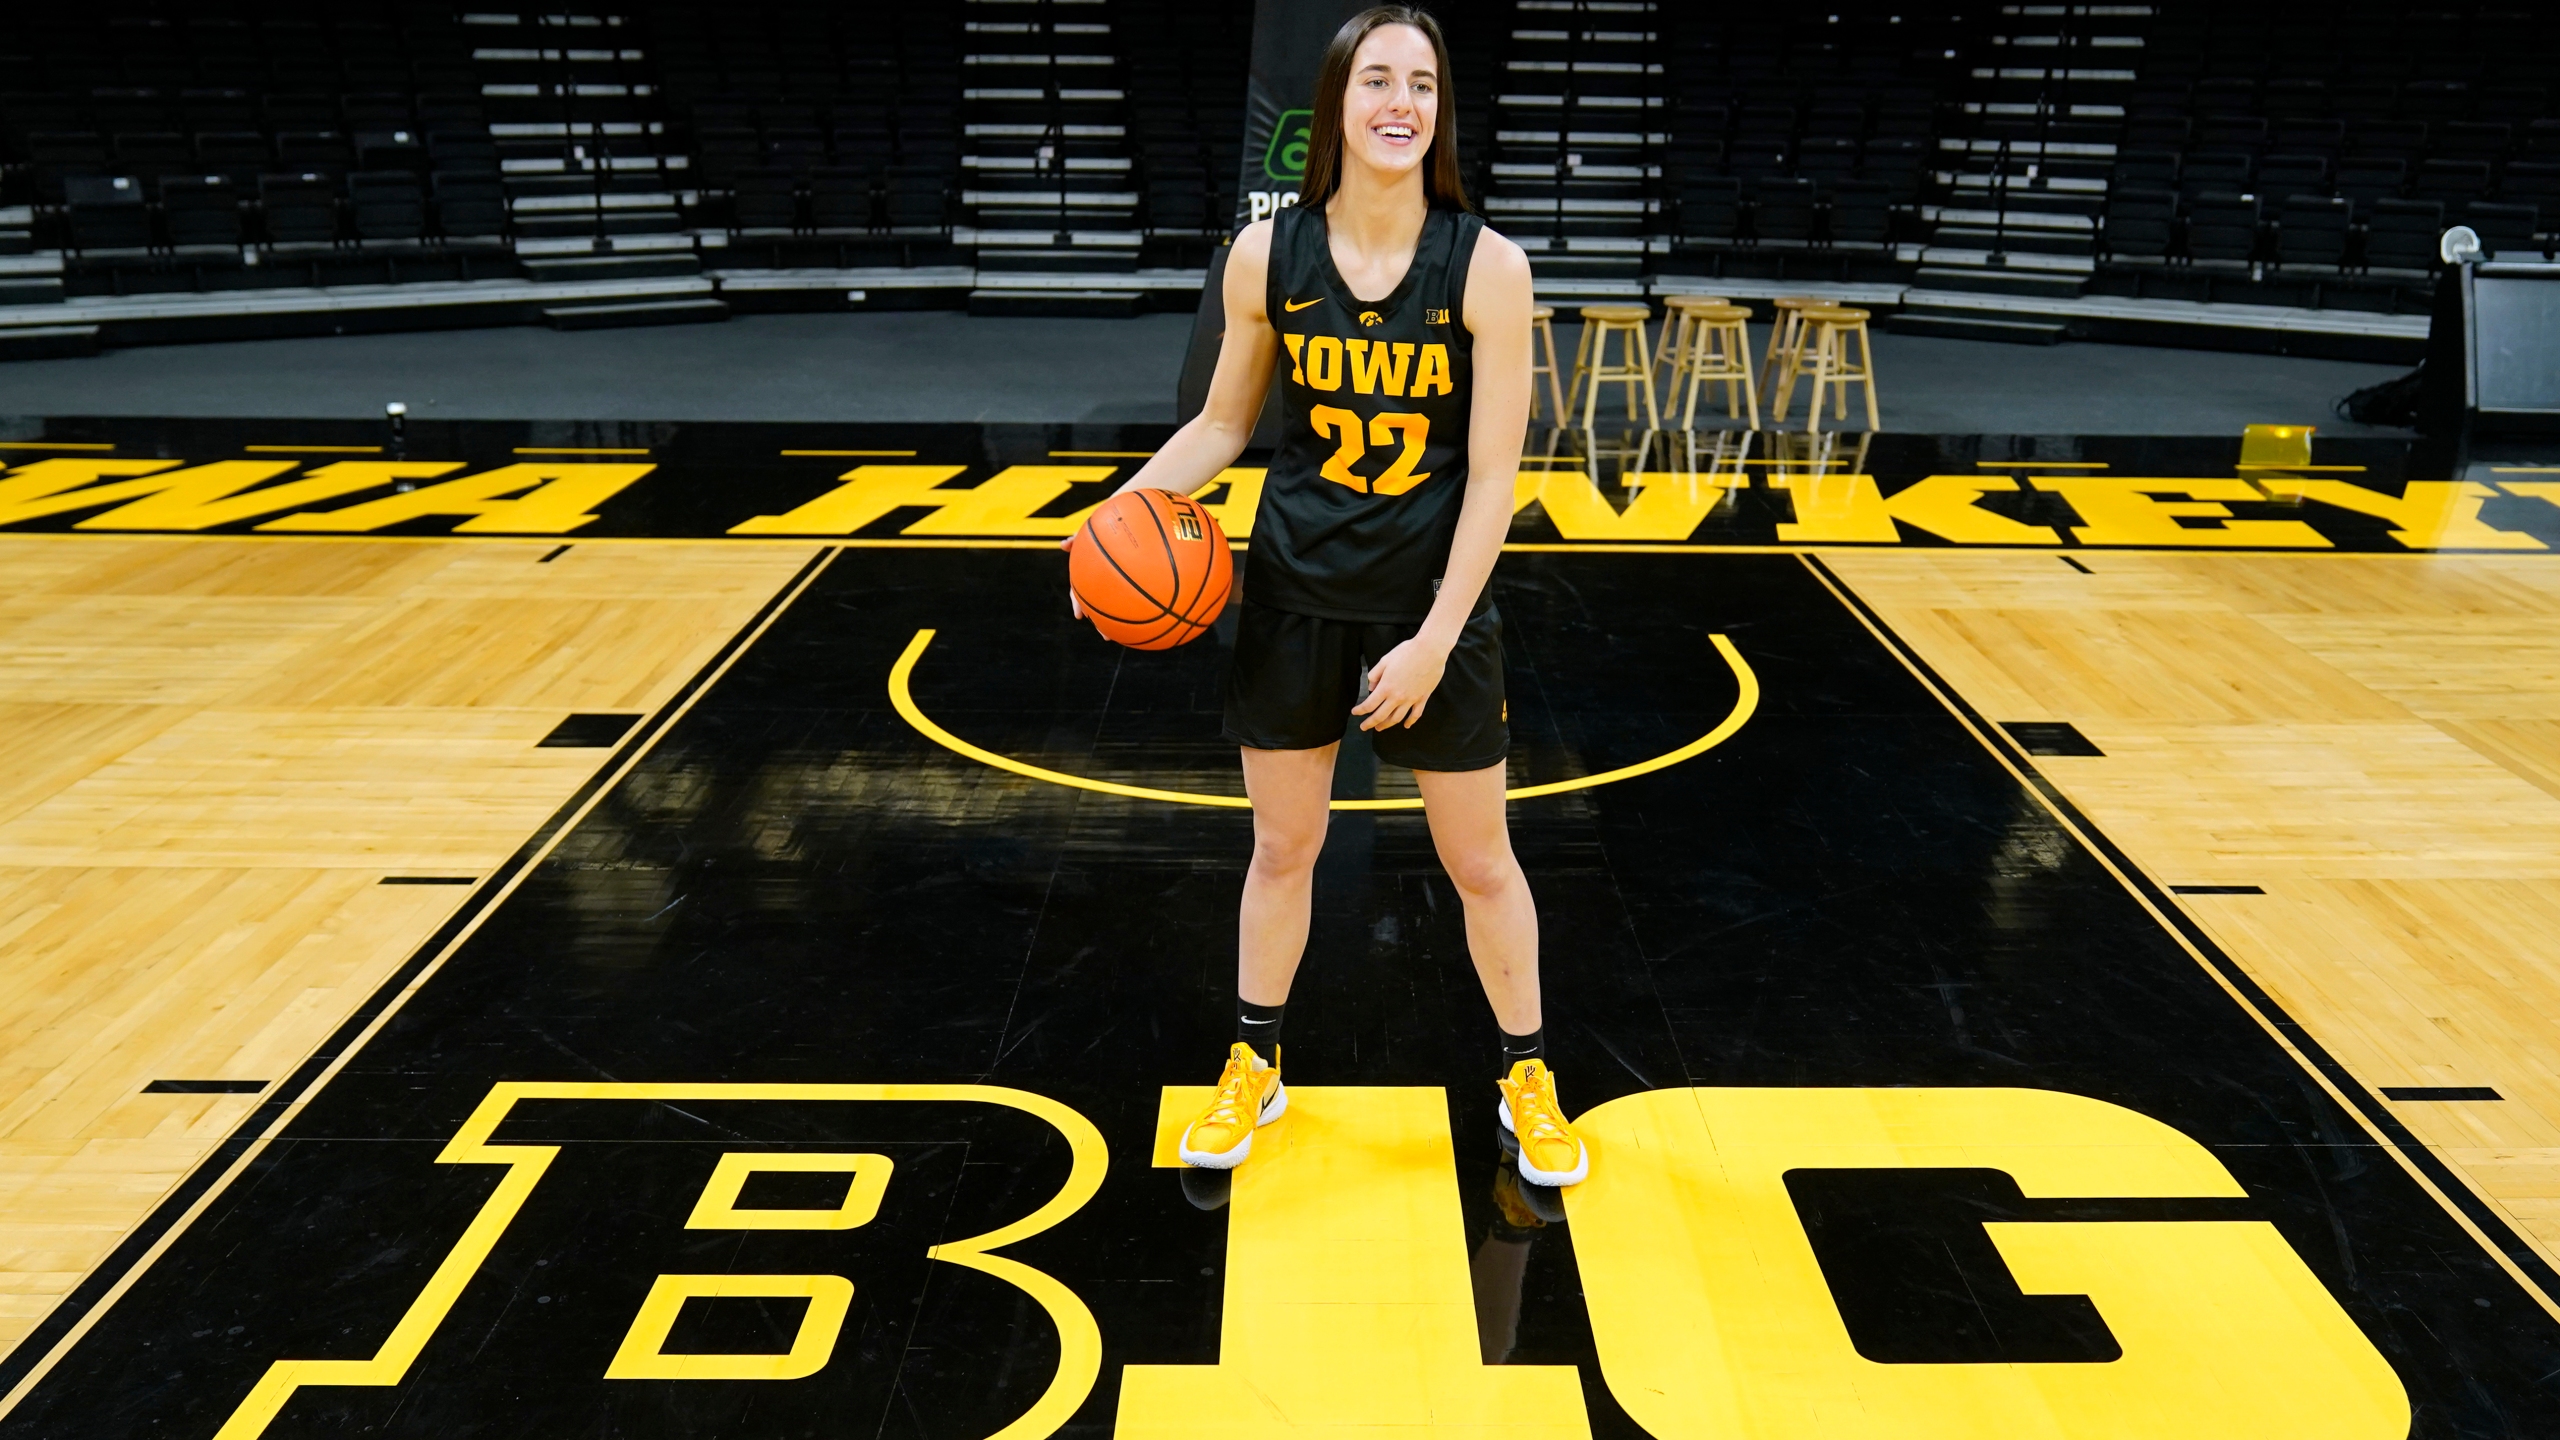 Iowas Caitlin Clark becoming marketing superstar in March Madness